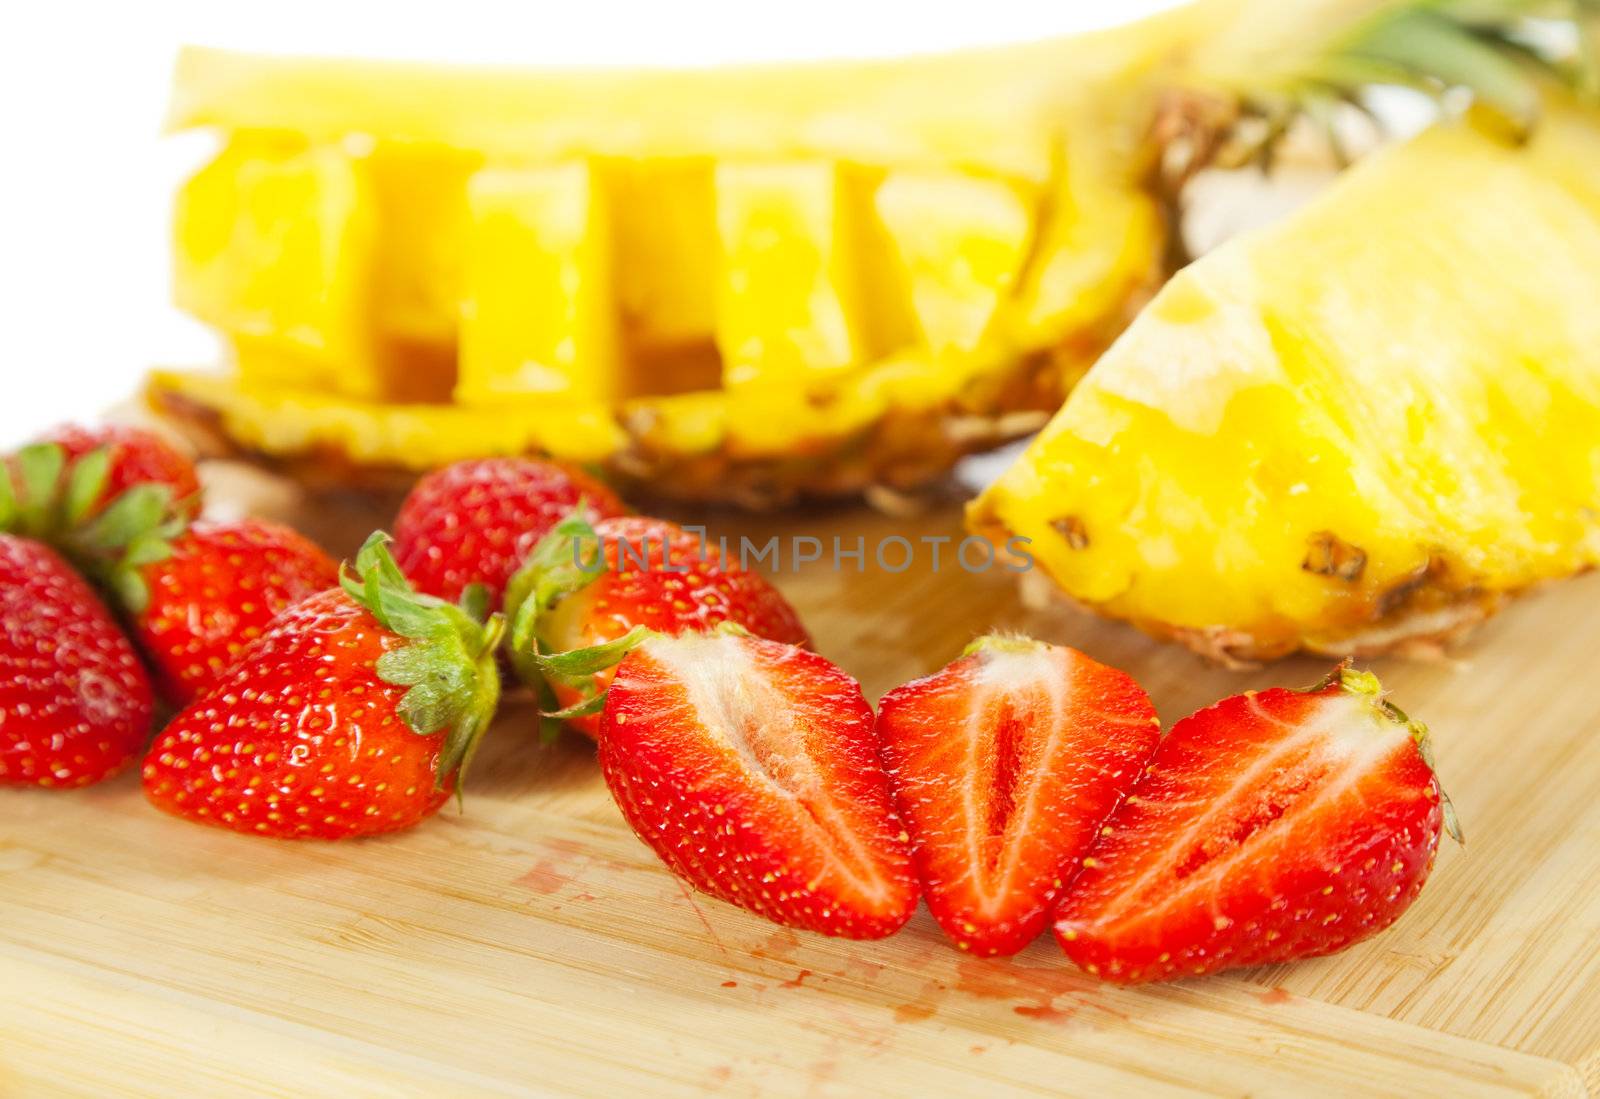 Close-up of fresh sliced strawberries and pineapple on wooden cutting board